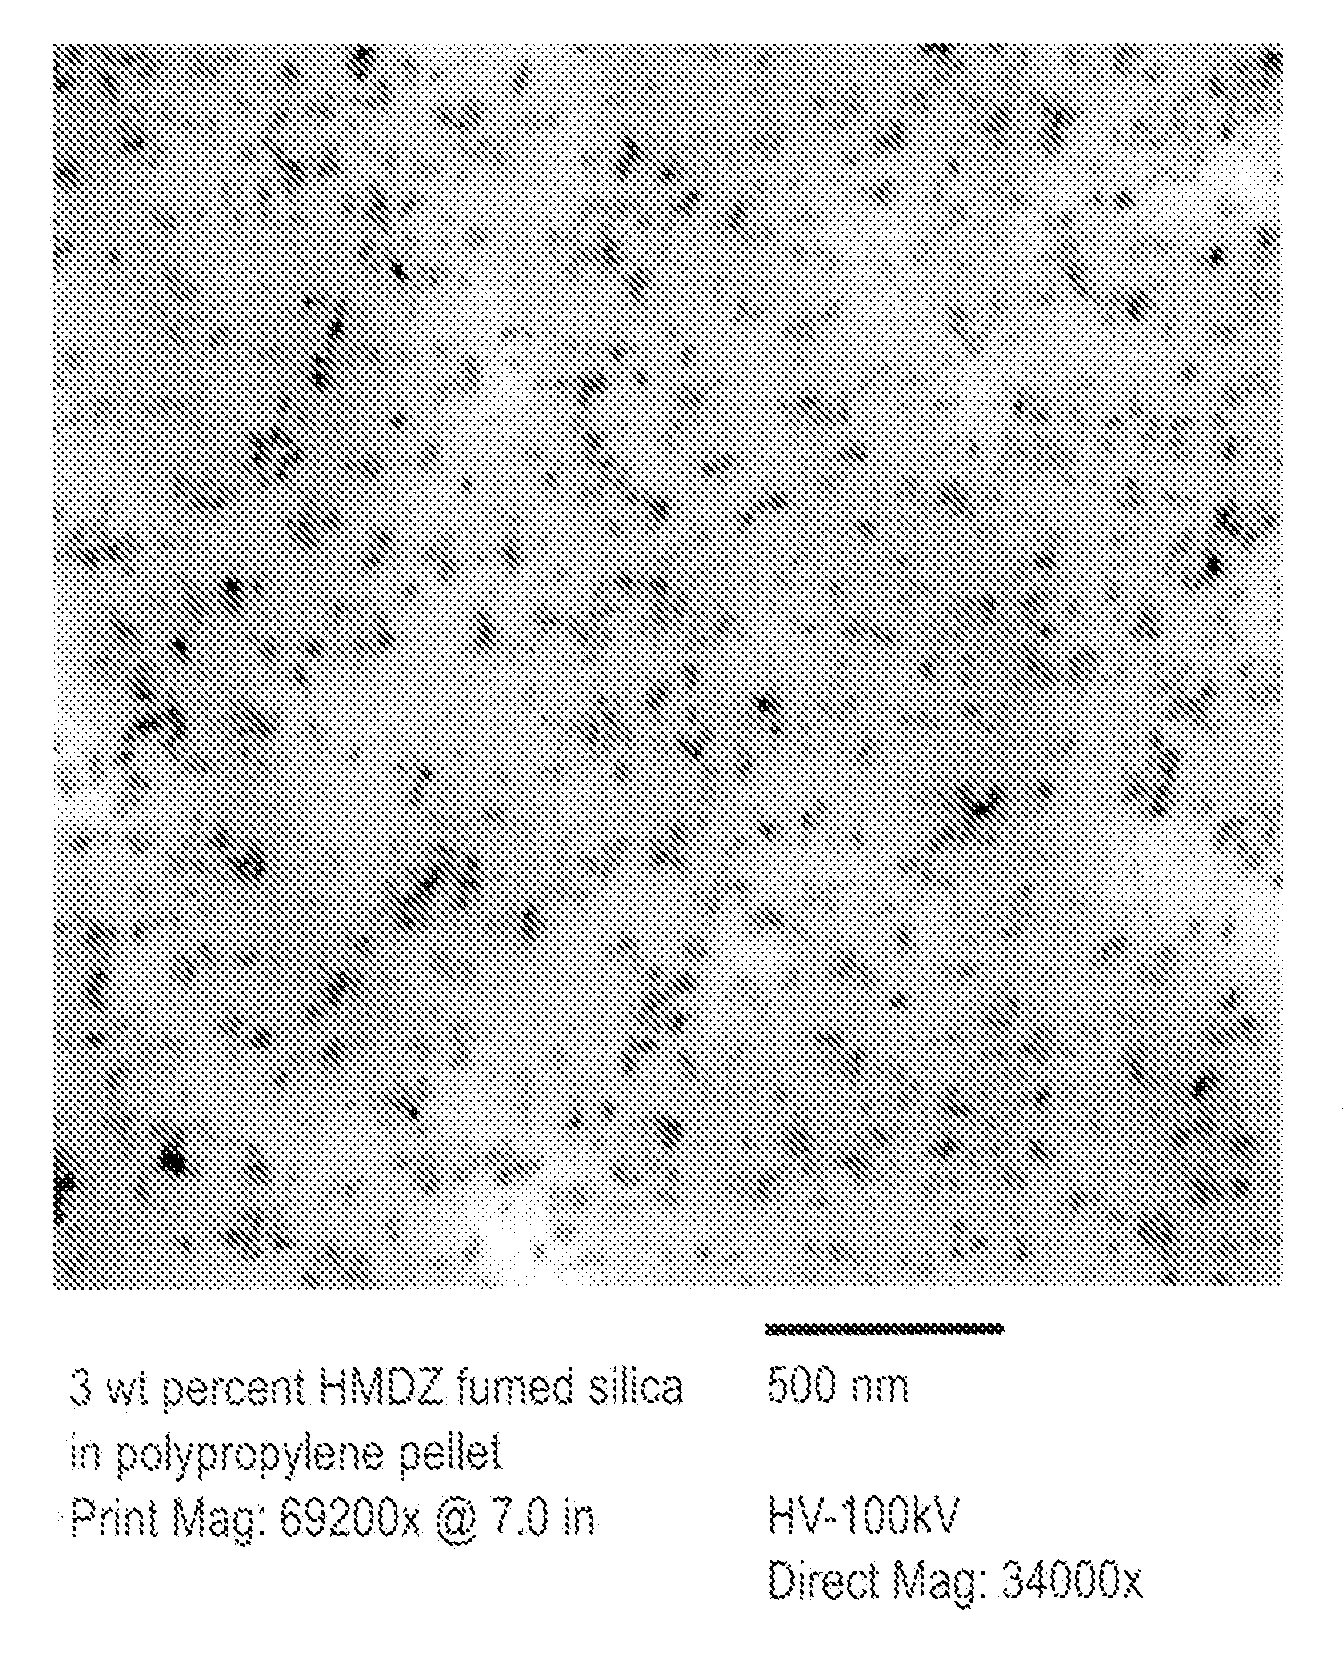 Biaxially Oriented Nanocomposite Film, Method of Manufacture, and Articles Thereof